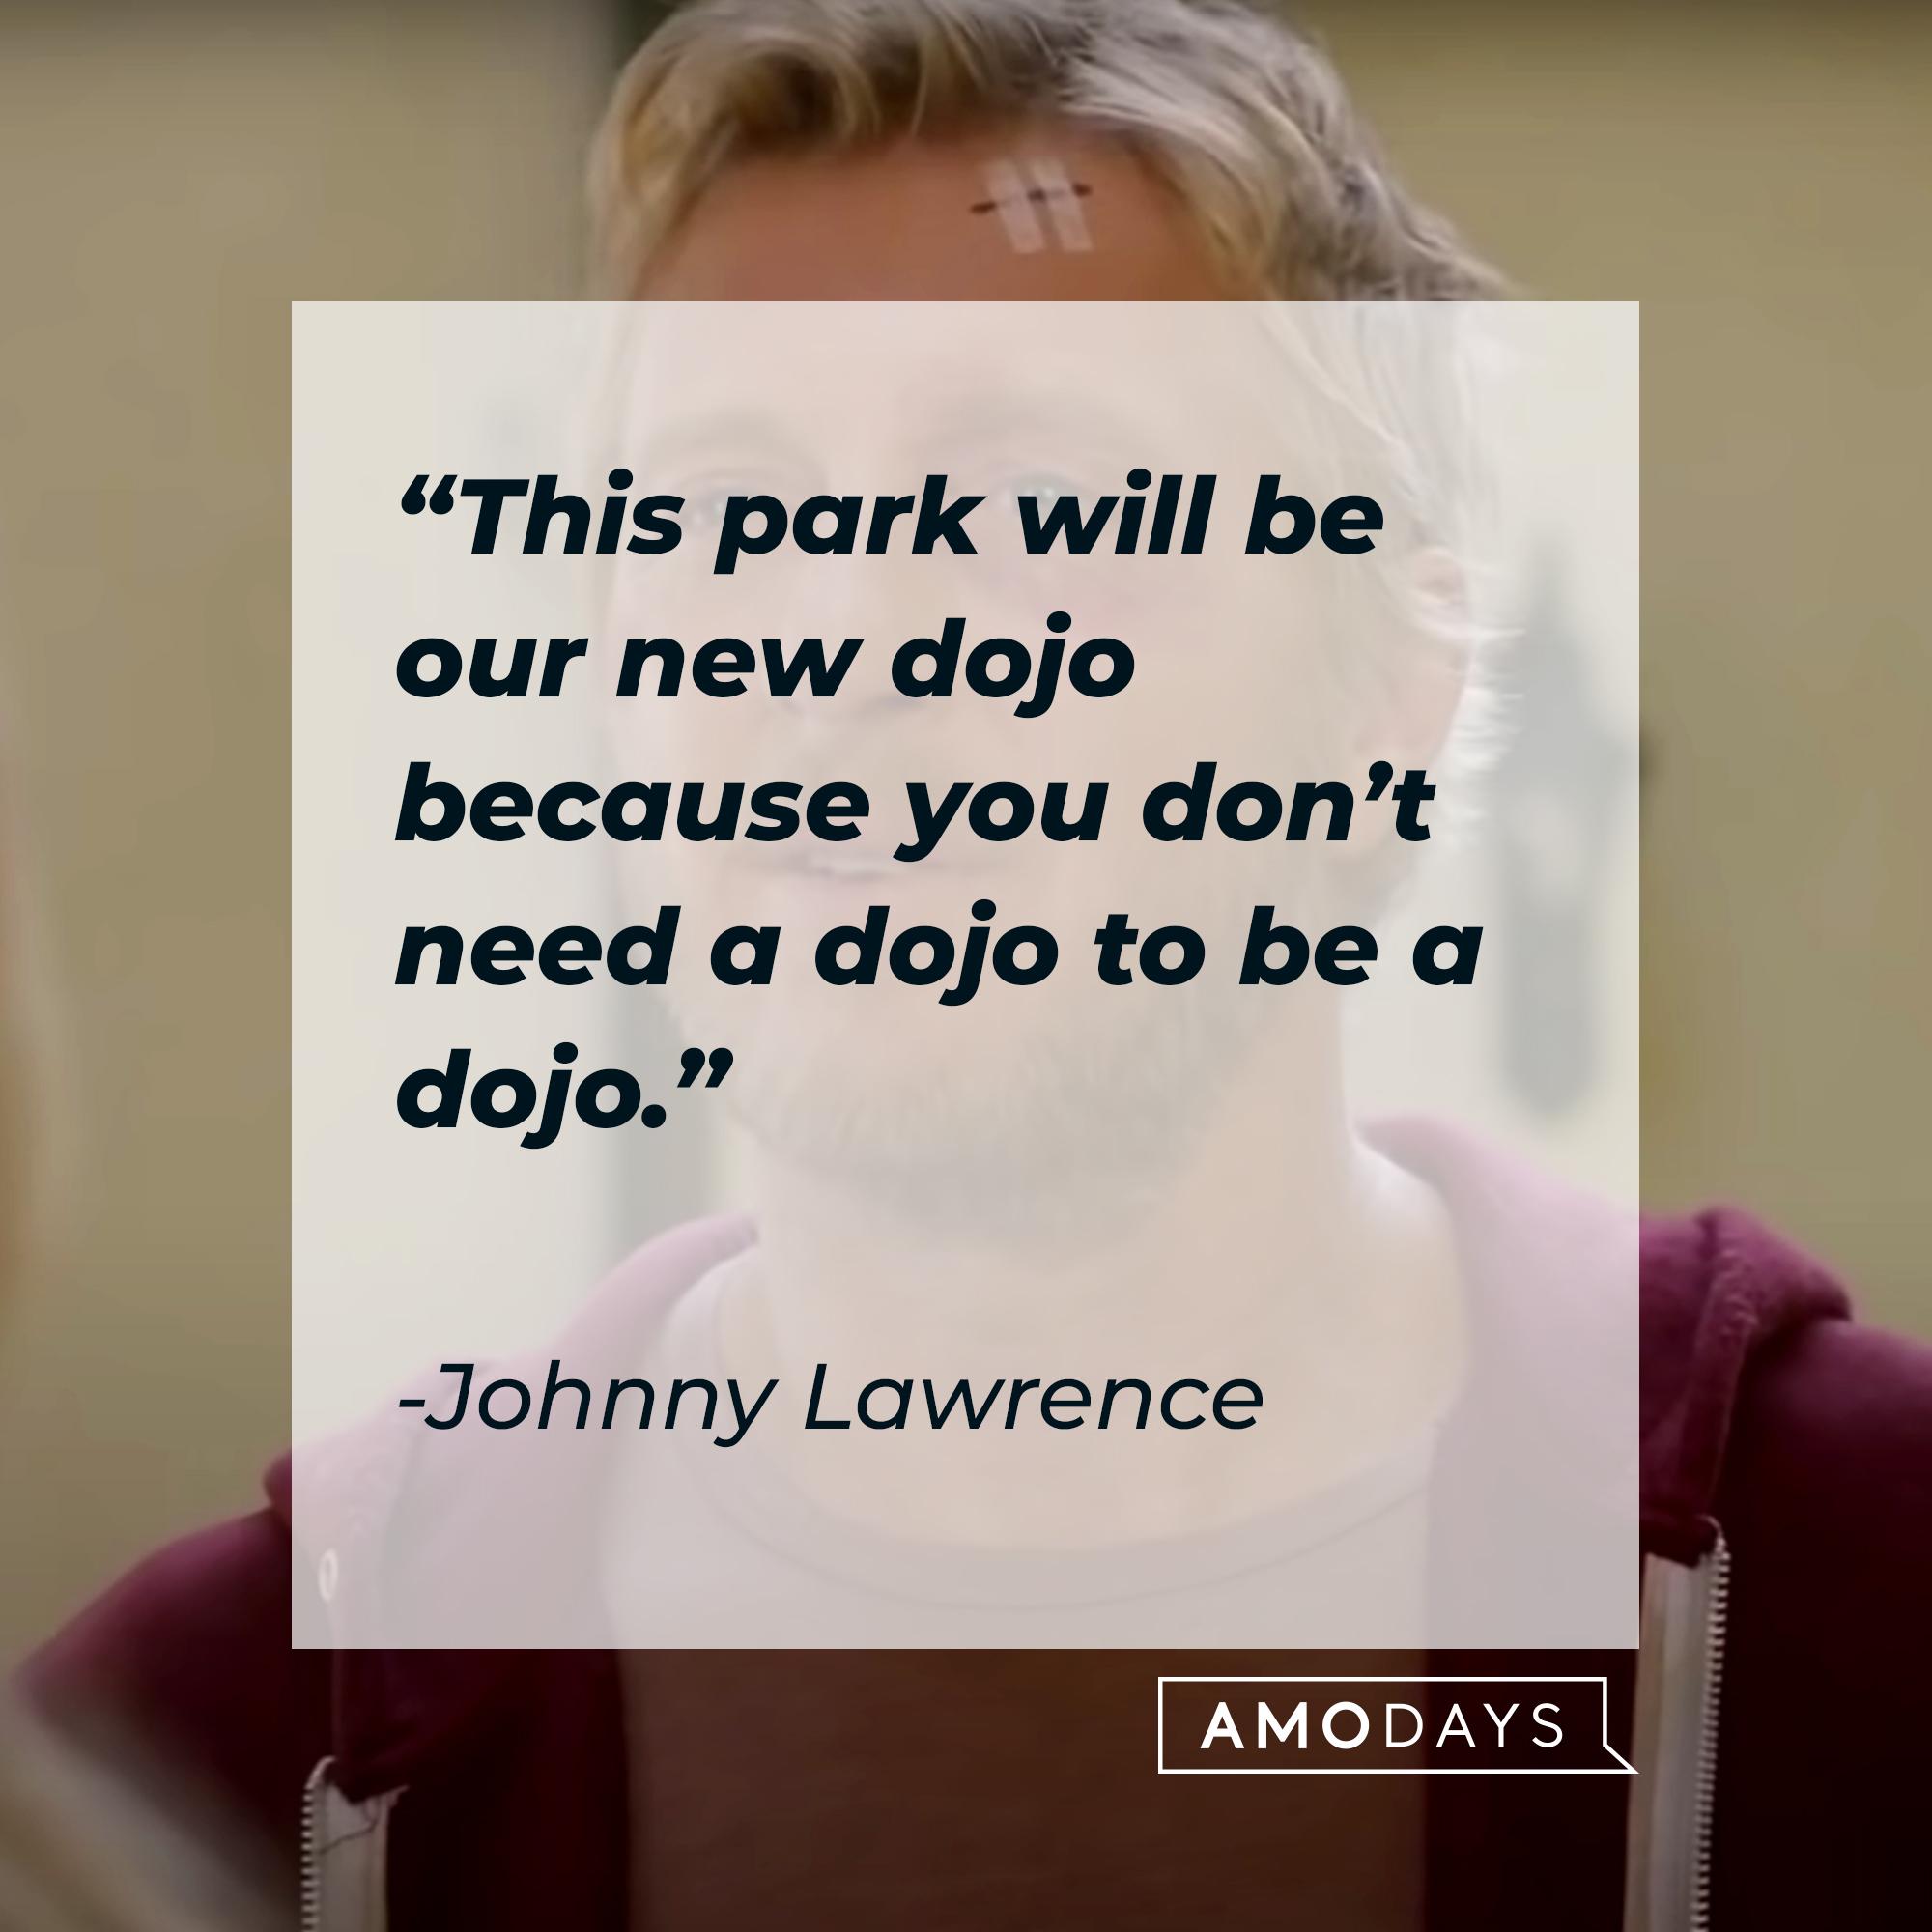 Johnny Lawrence, with his quote: “This park will be our new dojo because you don’t need a dojo to be a dojo.” | Source: facebook.com/CobraKaiSeries